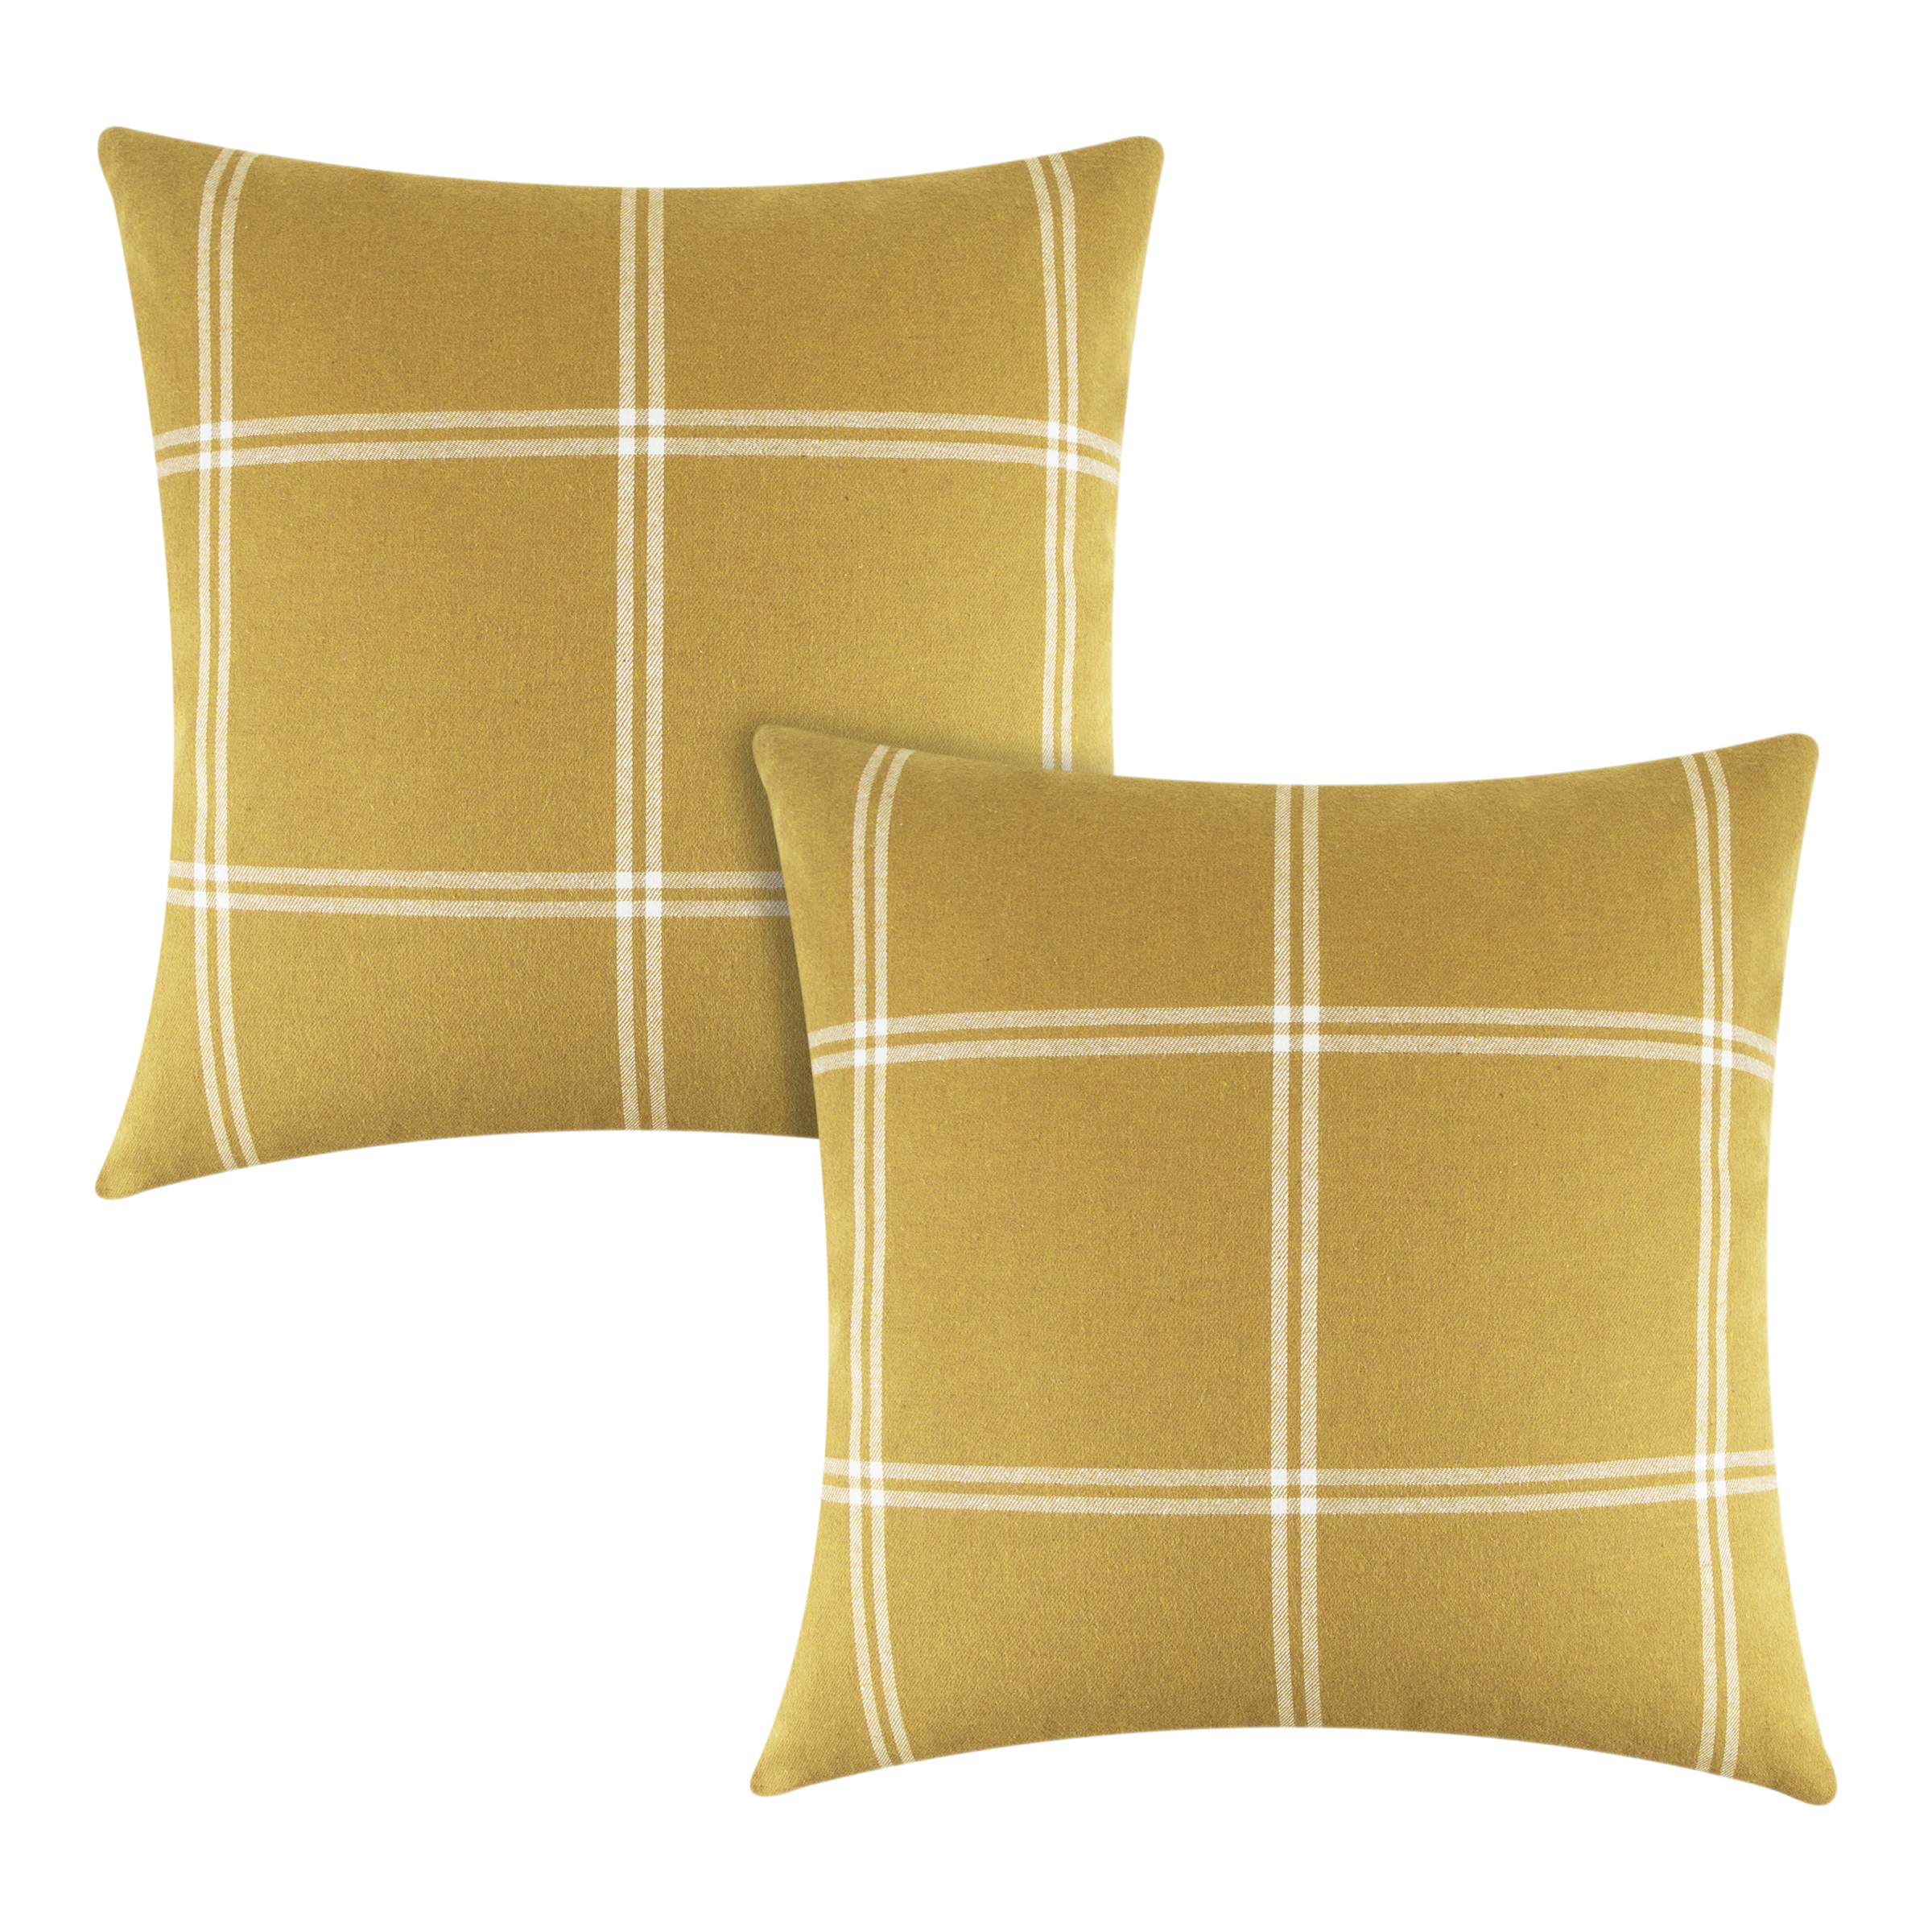 Better Homes & Gardens Reversible Windowpane Plaid to Solid Decorative Throw Pillow Cover, 2 Pack - image 1 of 5